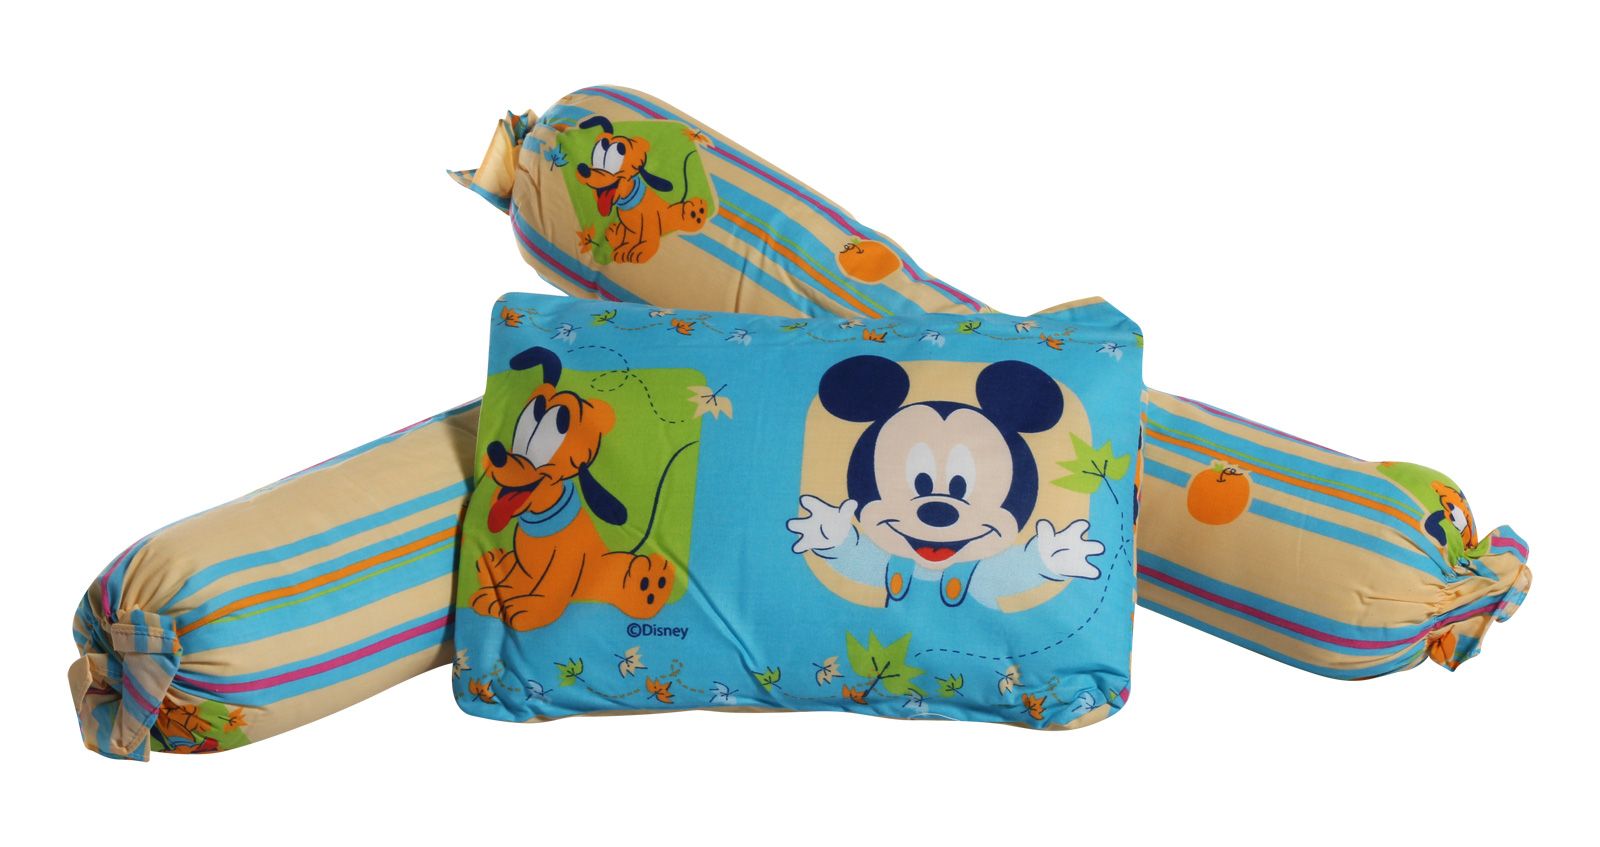 Sunbaby - Disney Baby Bolster with Pillow set